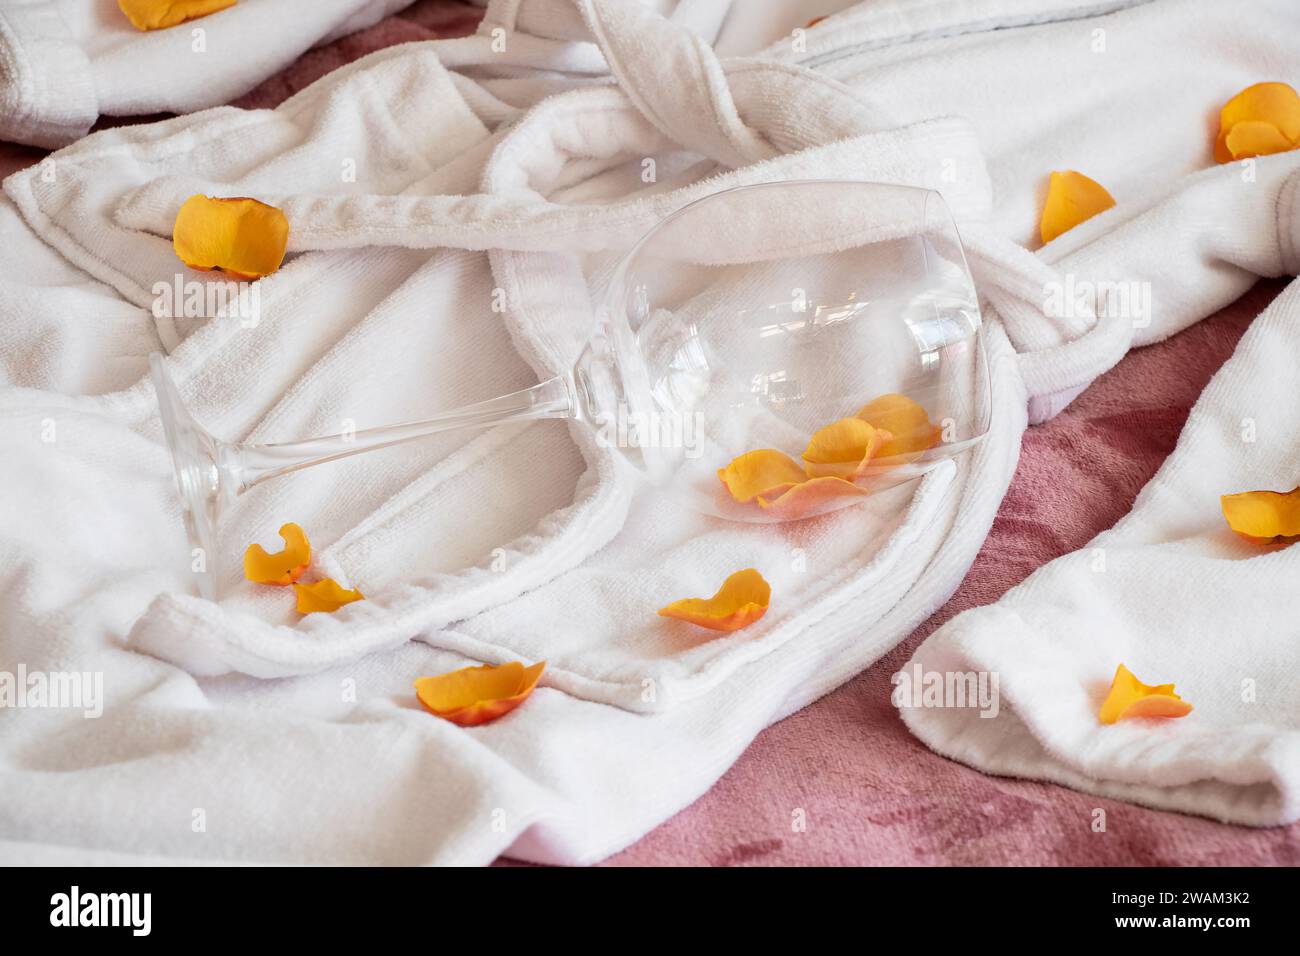 A woman's white terry robe lies on the bed, rose petals are scattered and an empty glass of wine, romantic relationship Stock Photo